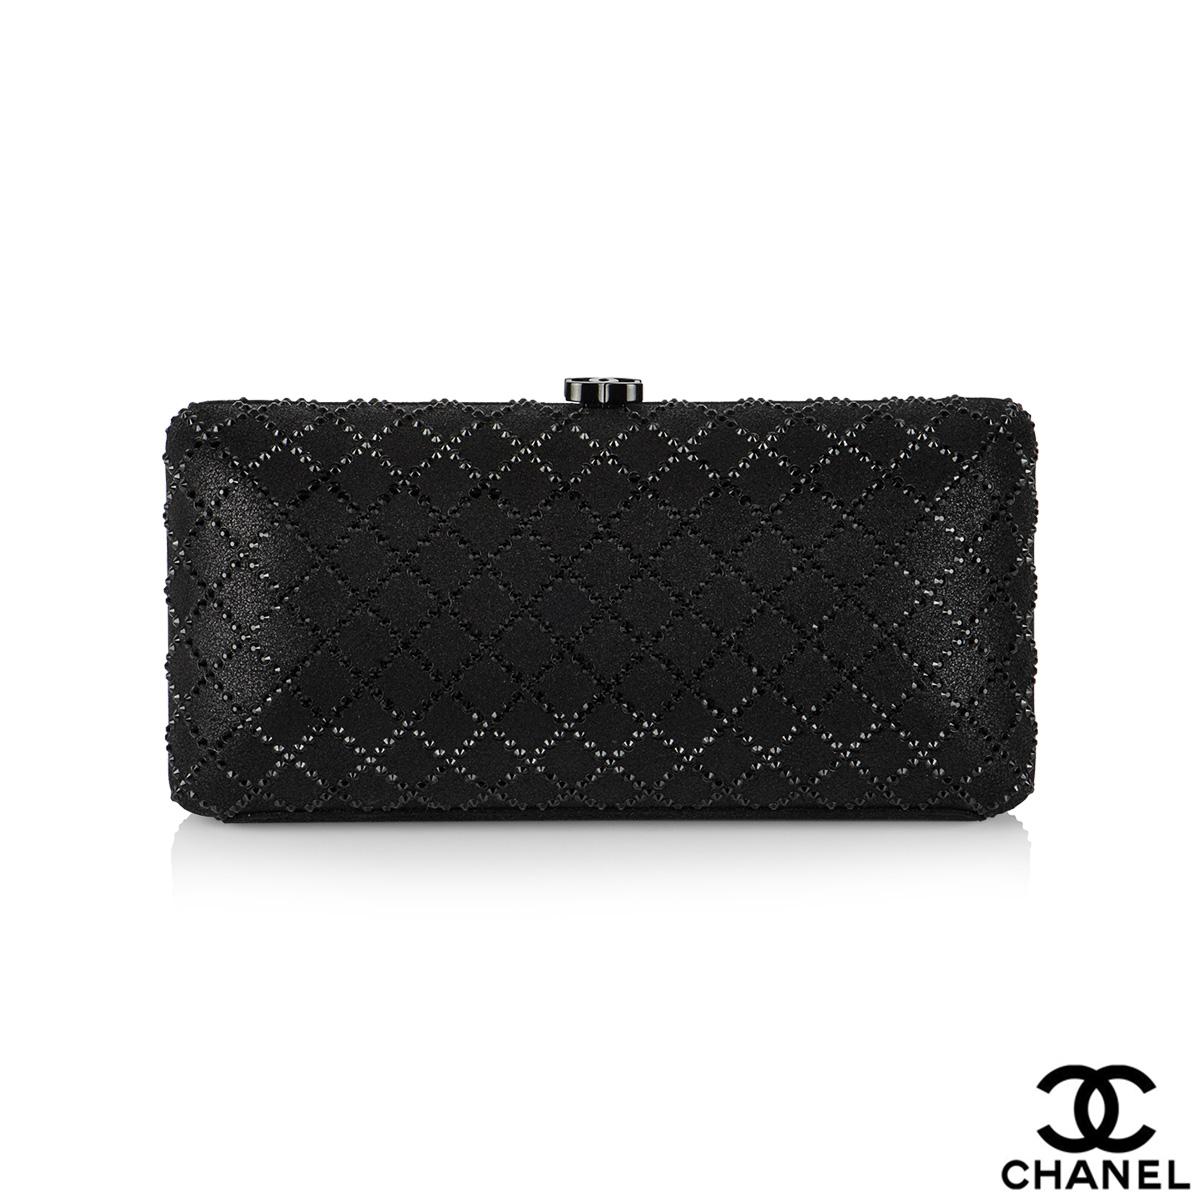 A stunning black lambskin Chanel crystal quilted clutch. This clutch is crafted of soft lambskin leather in black and features iridescent black crystals in a diamond pattern. The opening of the clutch is an iconic double 'C' logo made from metallic